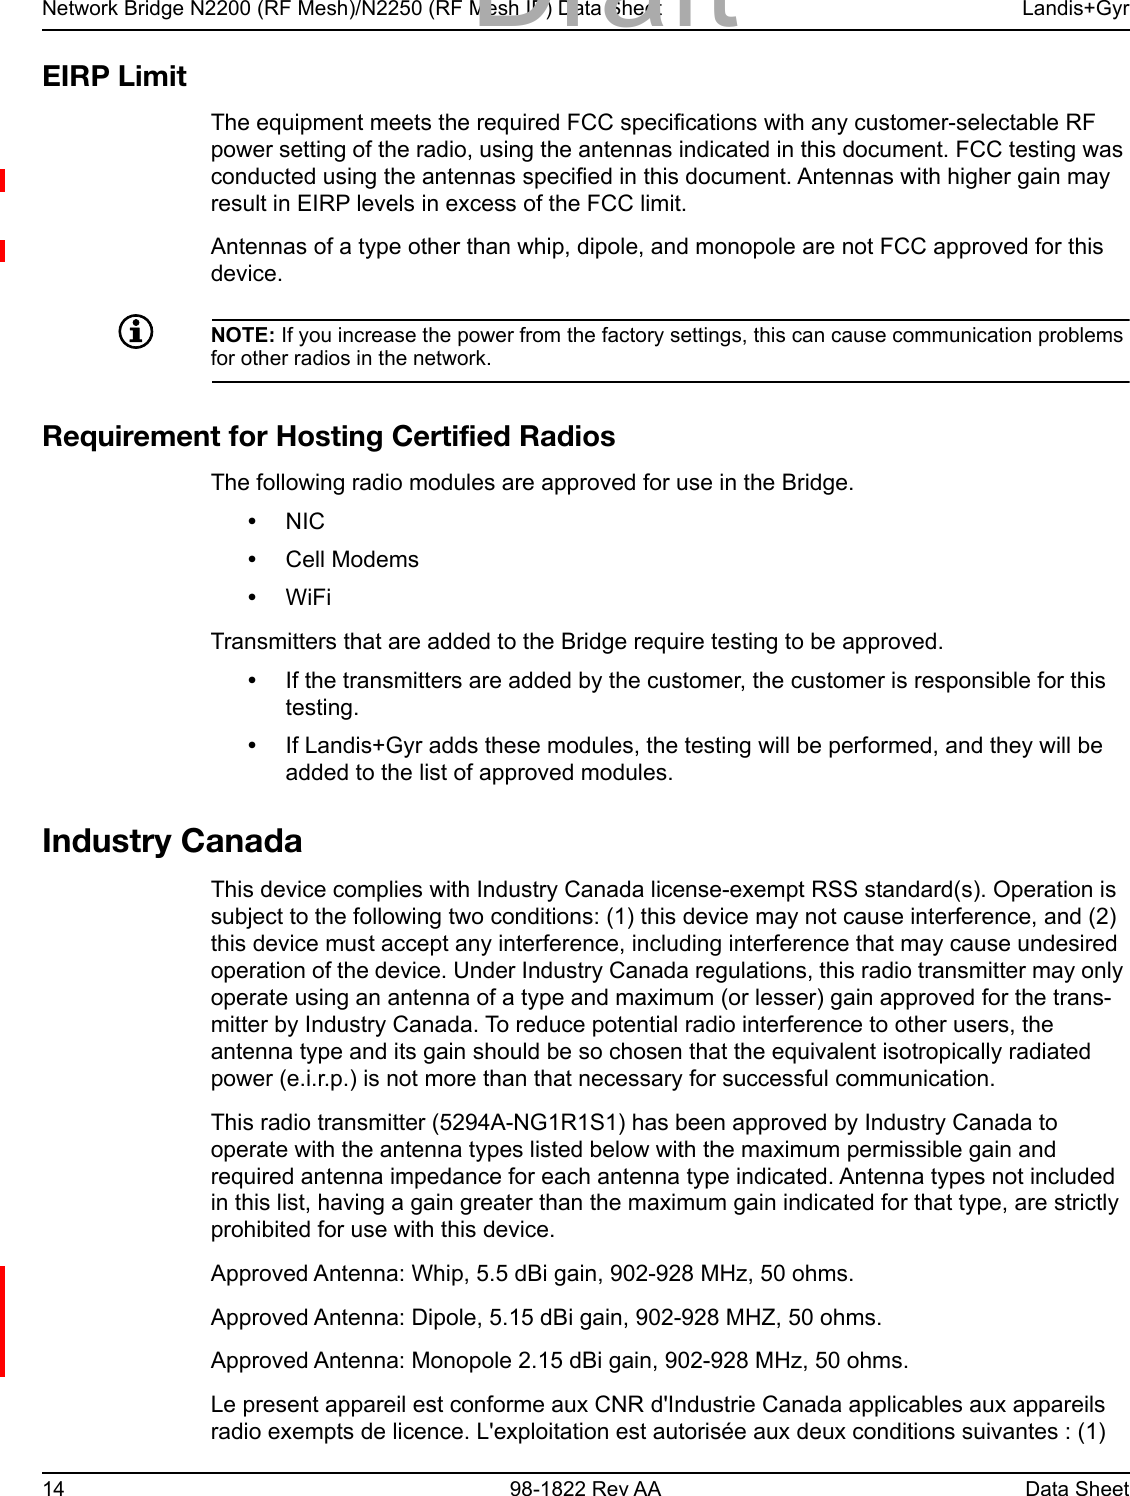 Network Bridge N2200 (RF Mesh)/N2250 (RF Mesh IP) Data Sheet Landis+Gyr14 98-1822 Rev AA Data SheetEIRP LimitThe equipment meets the required FCC specifications with any customer-selectable RF power setting of the radio, using the antennas indicated in this document. FCC testing was conducted using the antennas specified in this document. Antennas with higher gain may result in EIRP levels in excess of the FCC limit.Antennas of a type other than whip, dipole, and monopole are not FCC approved for this device.NOTE: If you increase the power from the factory settings, this can cause communication problems for other radios in the network.Requirement for Hosting Certified RadiosThe following radio modules are approved for use in the Bridge.•NIC•Cell Modems•WiFi Transmitters that are added to the Bridge require testing to be approved.•If the transmitters are added by the customer, the customer is responsible for this testing.•If Landis+Gyr adds these modules, the testing will be performed, and they will be added to the list of approved modules.Industry CanadaThis device complies with Industry Canada license-exempt RSS standard(s). Operation is subject to the following two conditions: (1) this device may not cause interference, and (2) this device must accept any interference, including interference that may cause undesired operation of the device. Under Industry Canada regulations, this radio transmitter may only operate using an antenna of a type and maximum (or lesser) gain approved for the trans-mitter by Industry Canada. To reduce potential radio interference to other users, the antenna type and its gain should be so chosen that the equivalent isotropically radiated power (e.i.r.p.) is not more than that necessary for successful communication.This radio transmitter (5294A-NG1R1S1) has been approved by Industry Canada to operate with the antenna types listed below with the maximum permissible gain and required antenna impedance for each antenna type indicated. Antenna types not included in this list, having a gain greater than the maximum gain indicated for that type, are strictly prohibited for use with this device.Approved Antenna: Whip, 5.5 dBi gain, 902-928 MHz, 50 ohms.Approved Antenna: Dipole, 5.15 dBi gain, 902-928 MHZ, 50 ohms.Approved Antenna: Monopole 2.15 dBi gain, 902-928 MHz, 50 ohms.Le present appareil est conforme aux CNR d&apos;Industrie Canada applicables aux appareils radio exempts de licence. L&apos;exploitation est autorisée aux deux conditions suivantes : (1) Draft